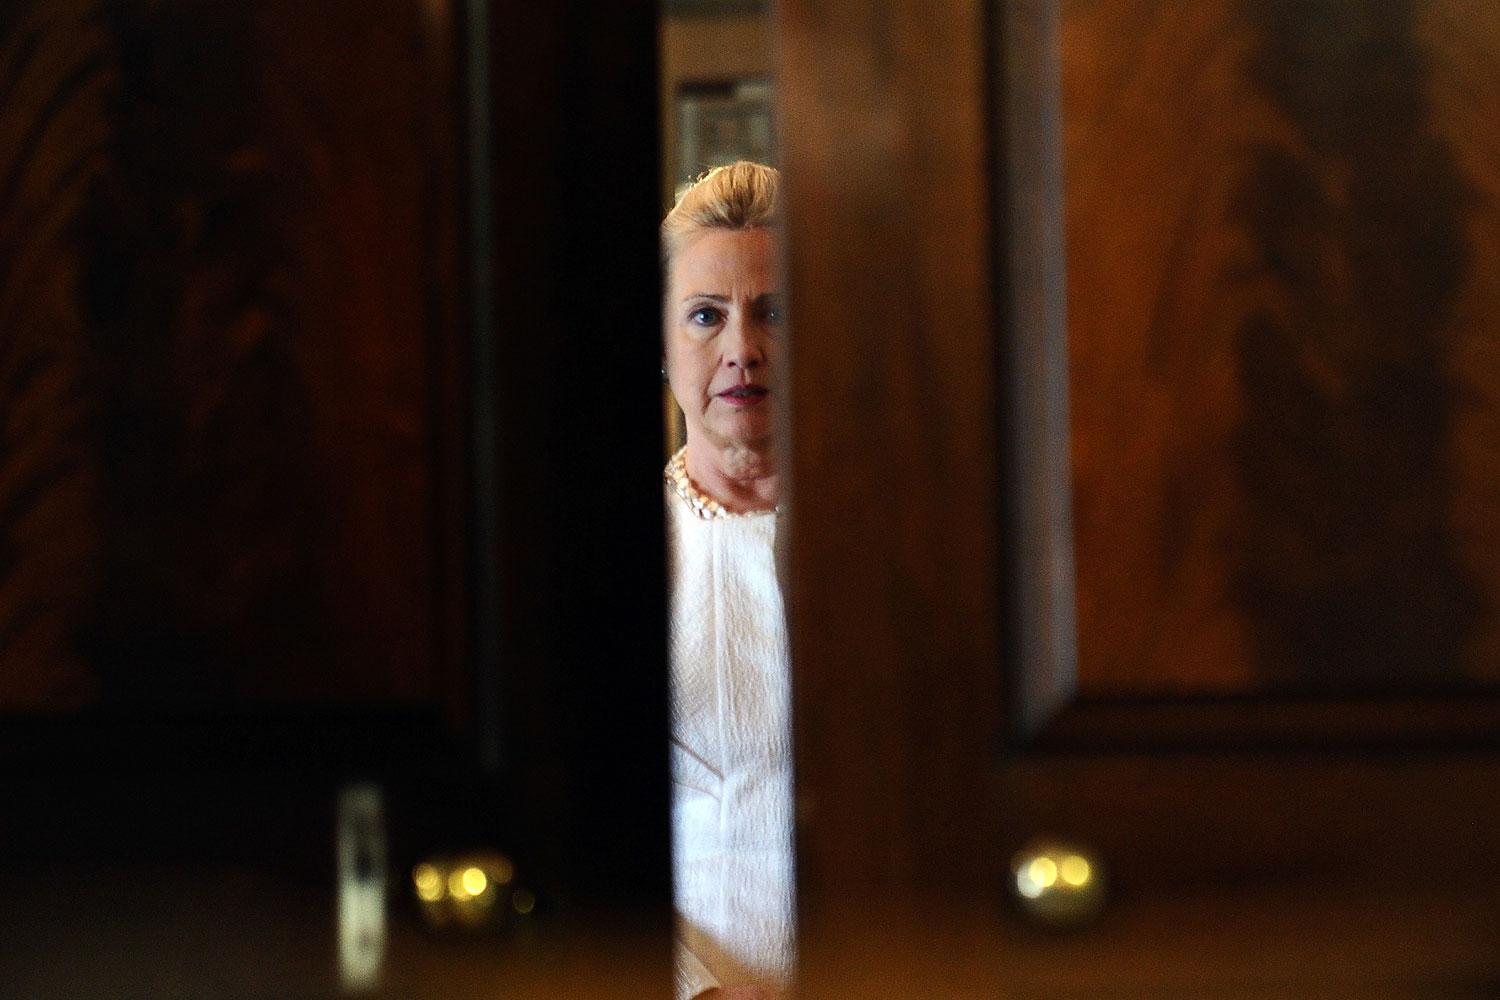 January 12, 2012. US Secretary of State Hillary Clinton is seen through a door before giving press conference with Algerian Foreign Minister at the State Department in Washington, DC.